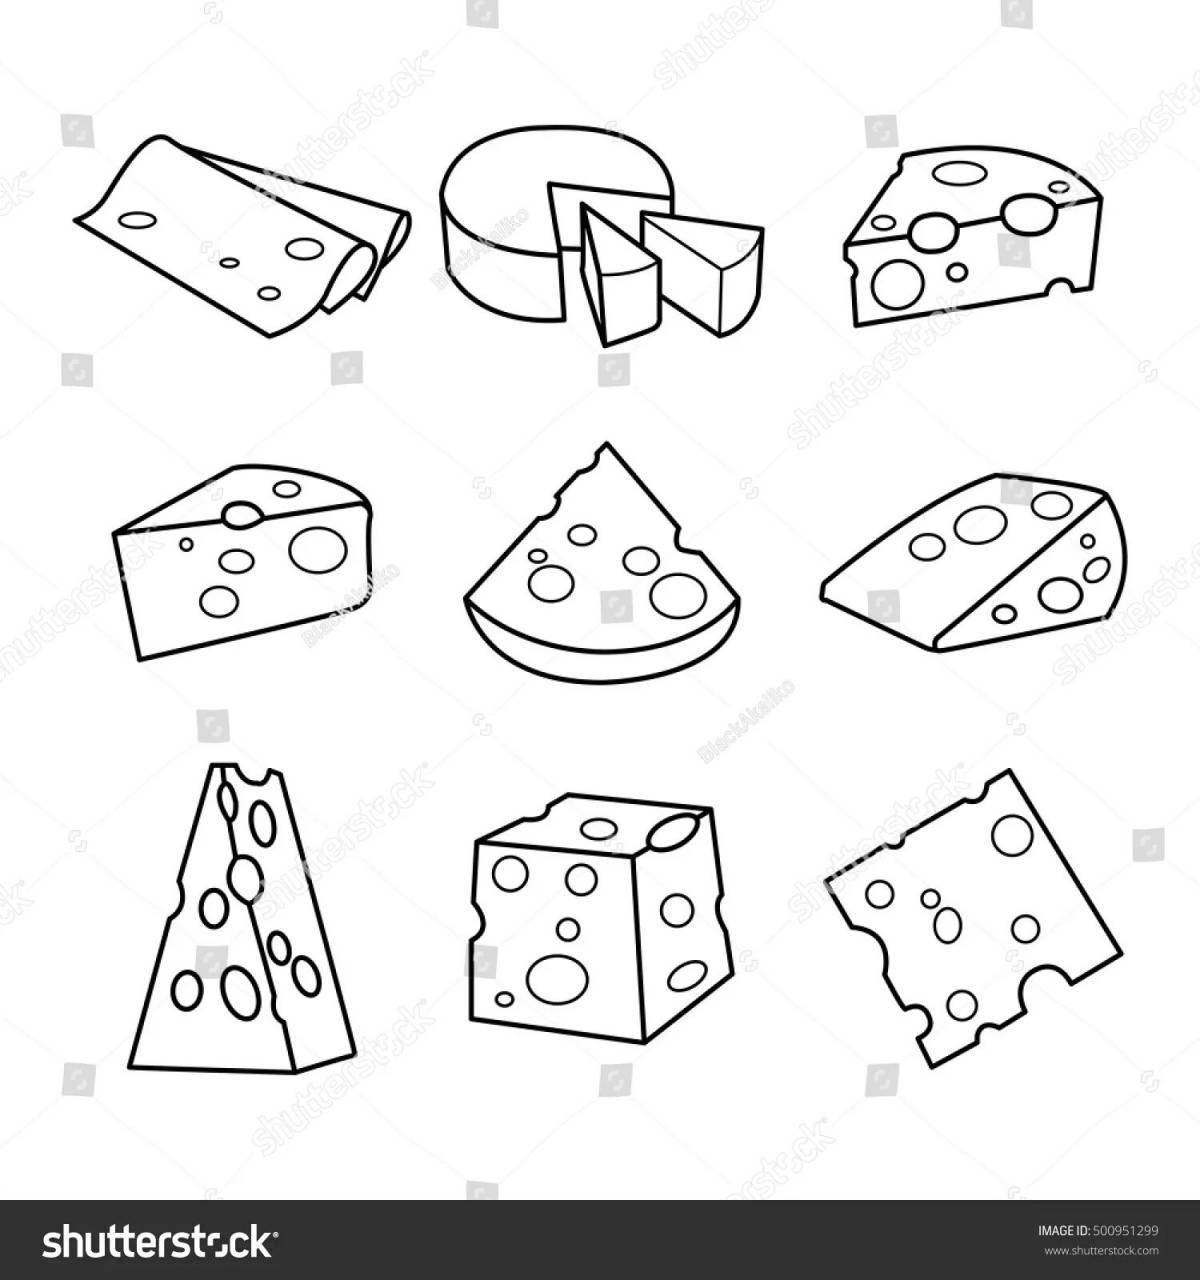 Great cheese coloring page